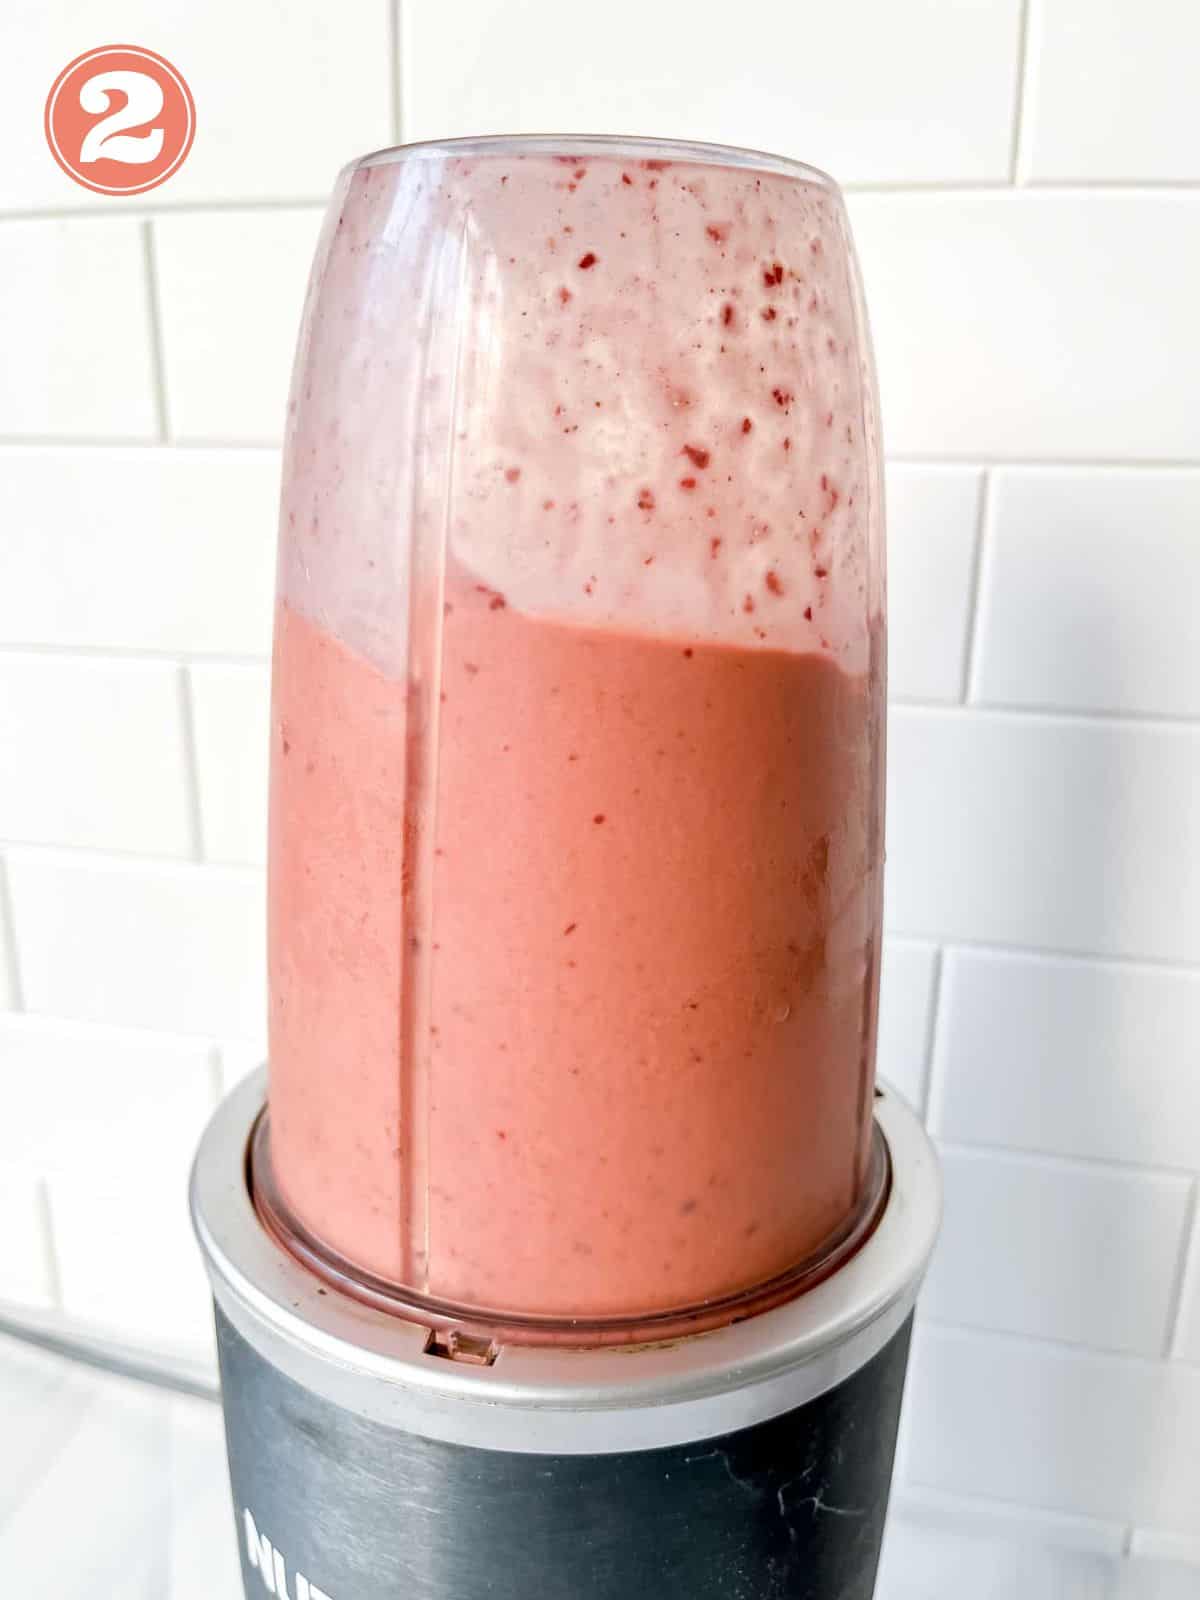 pink smoothie in a blender in front of a white tiled wall labelled number two.